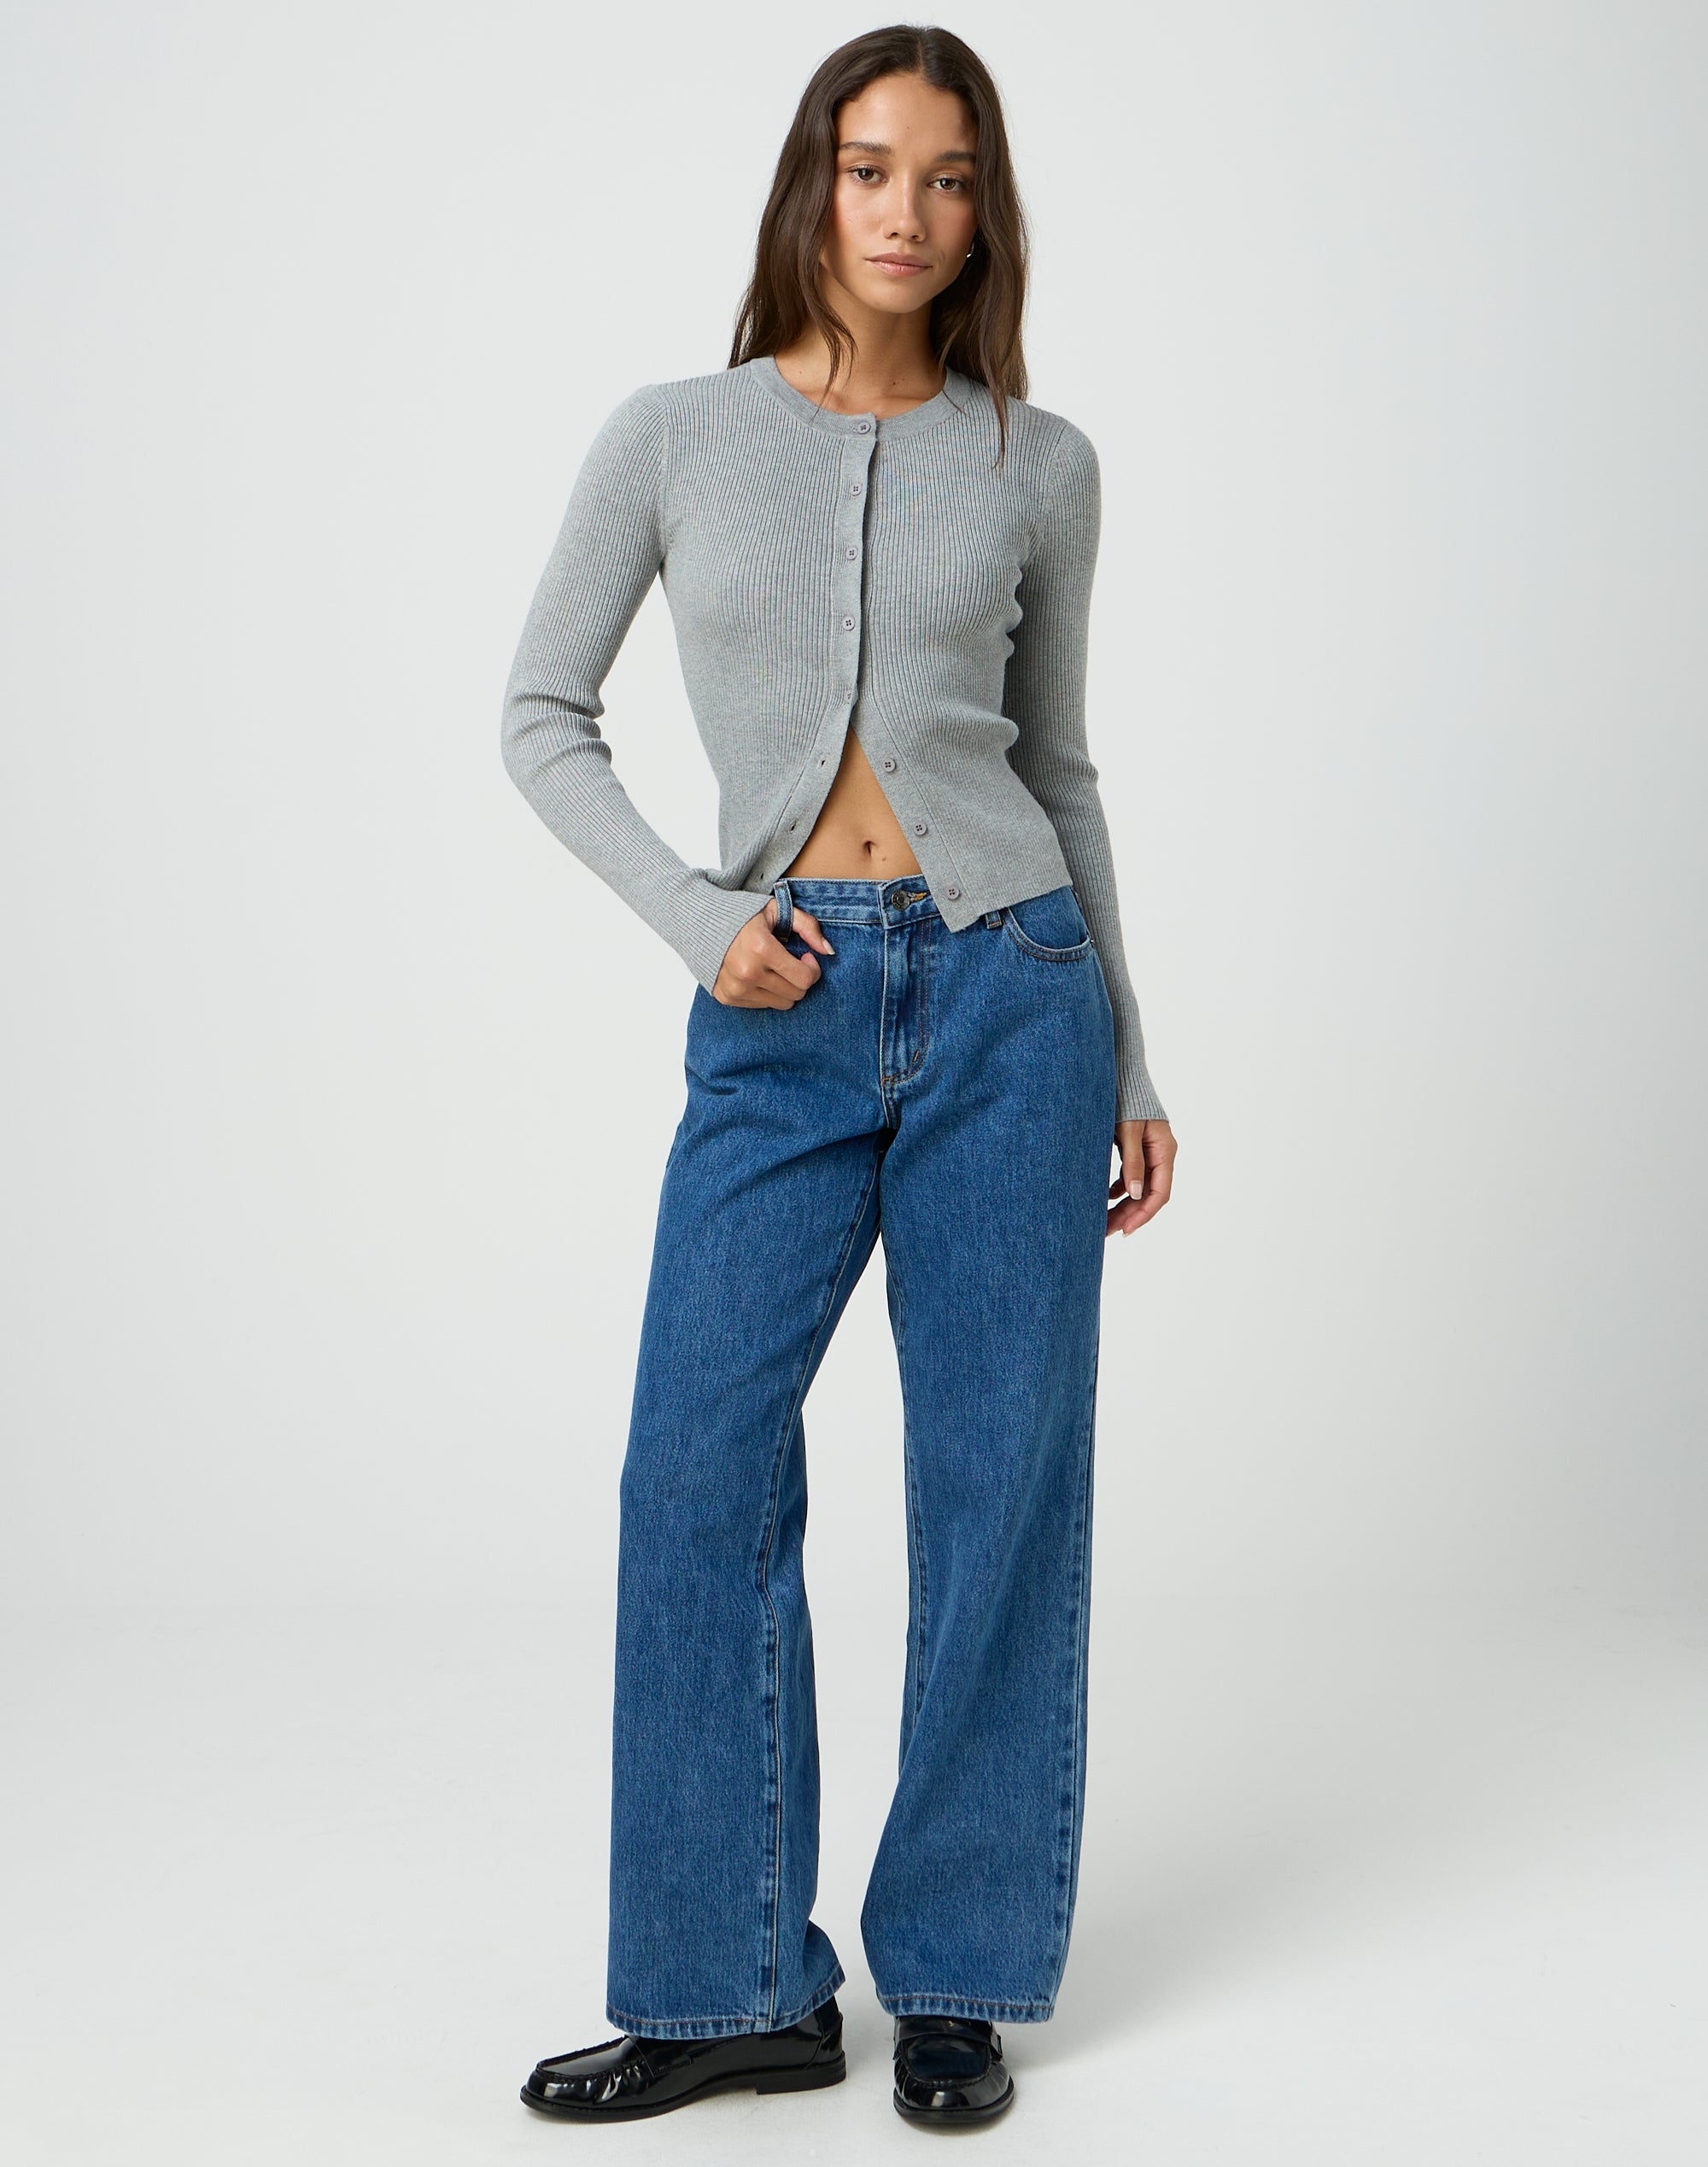 https://www.glassons.com/content/products/aimee-low-rise-straight-jean-suzy-mid-wash-front-jd54235phem.jpg